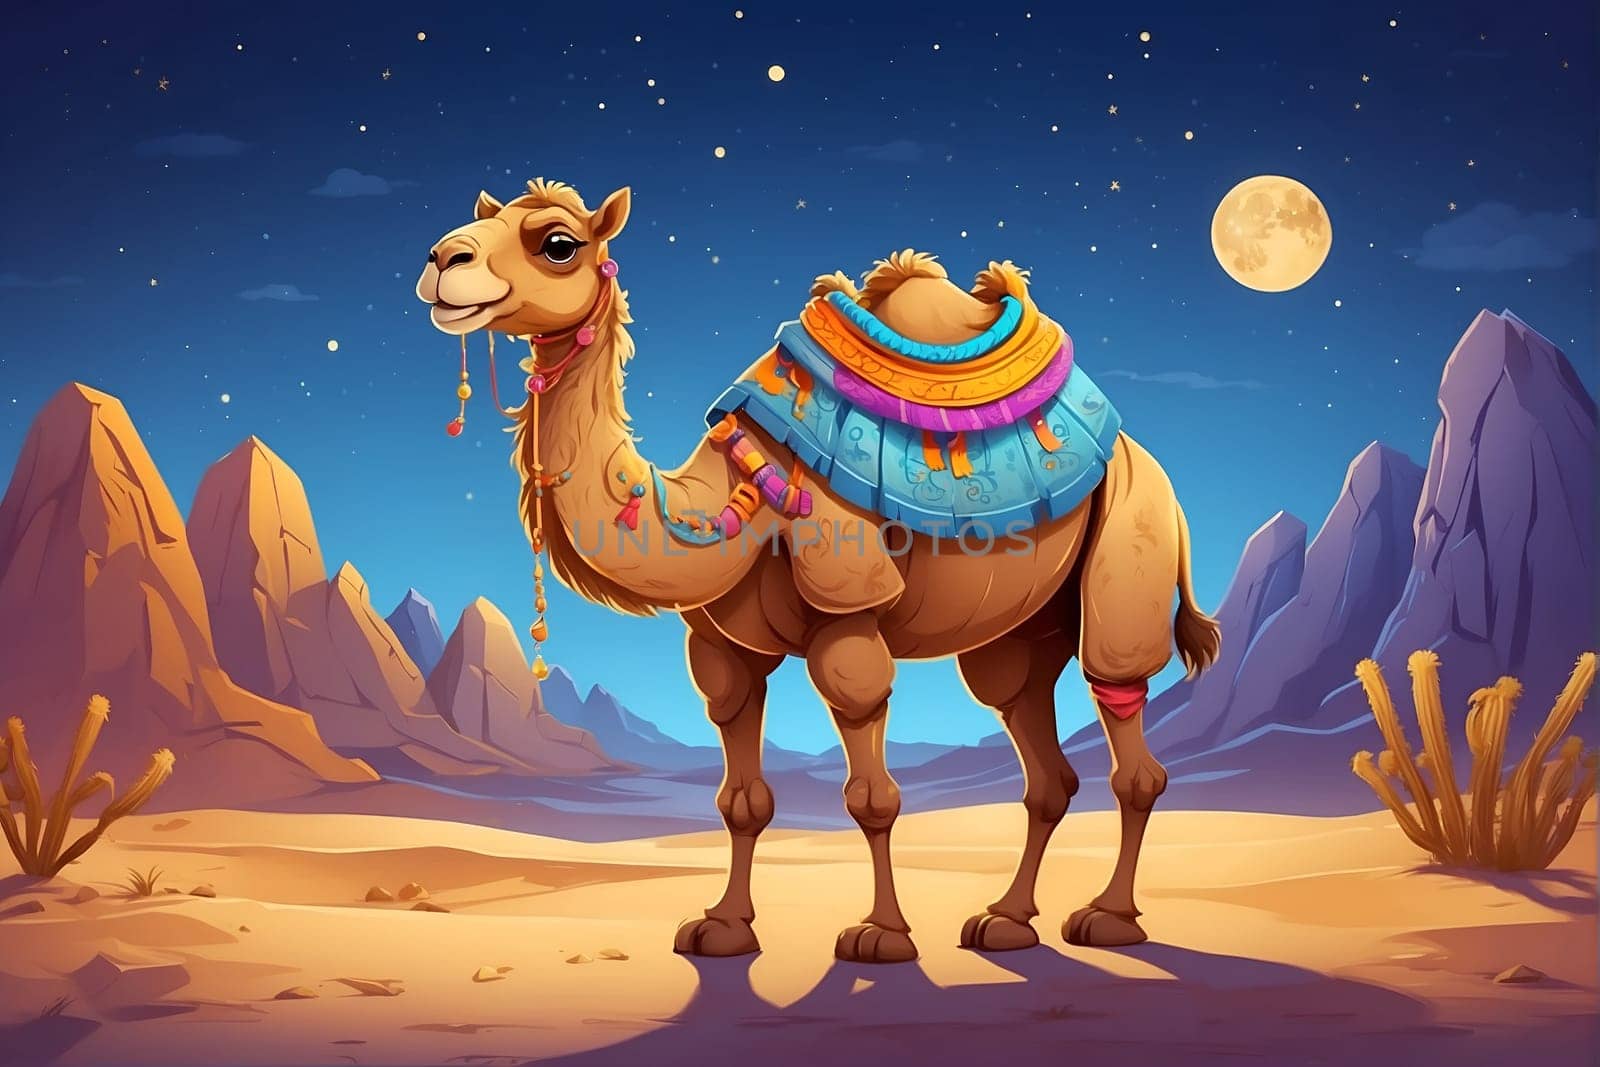 A camel stands in the desert at night, illuminated by the moonlight.